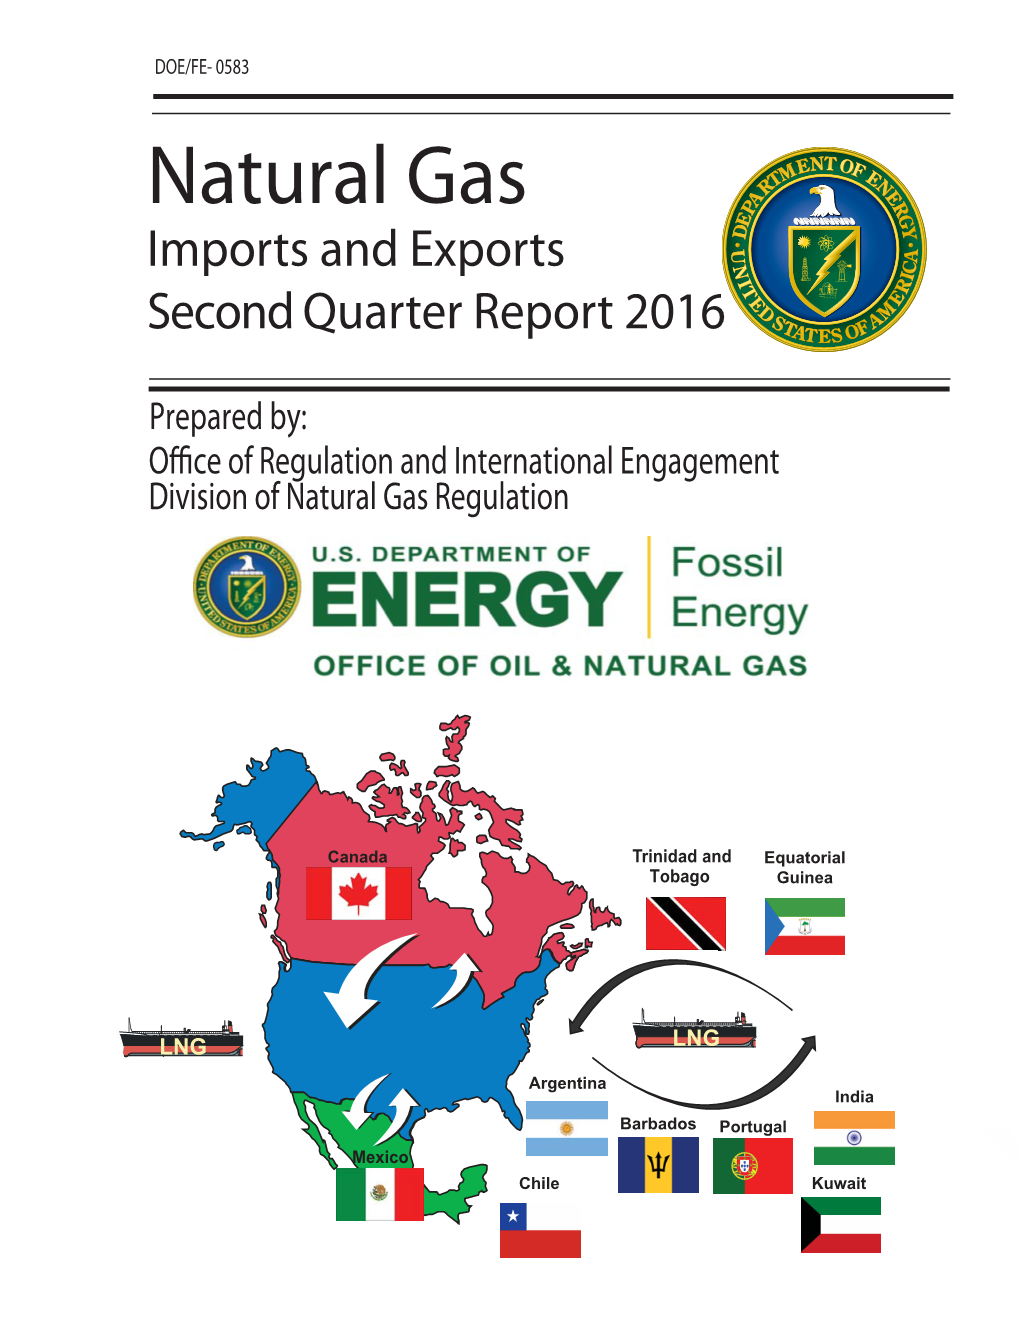 Natural Gas Imports and Exports Second Quarter Report 2016